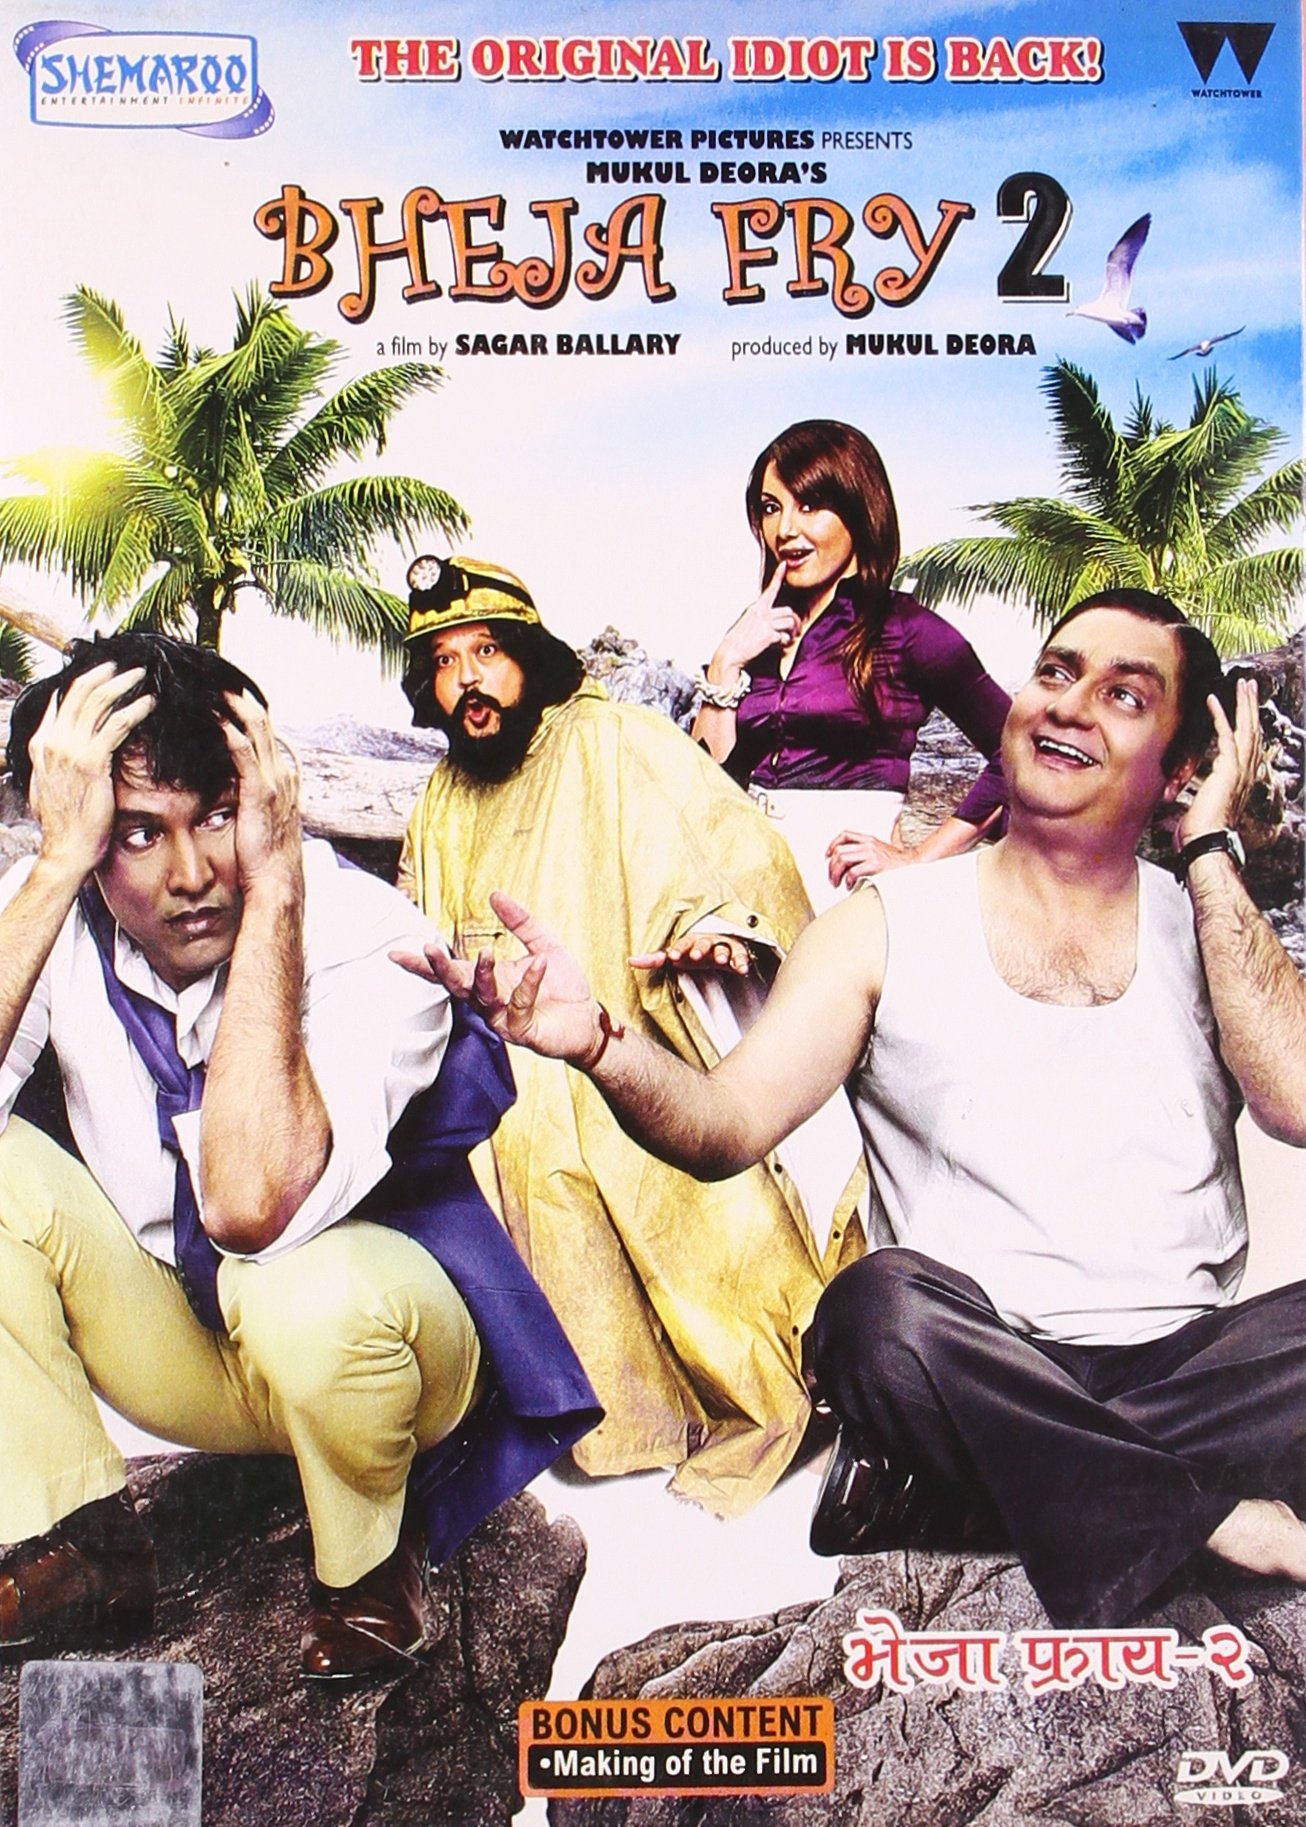 bheja-fry-2-movie-purchase-or-watch-online